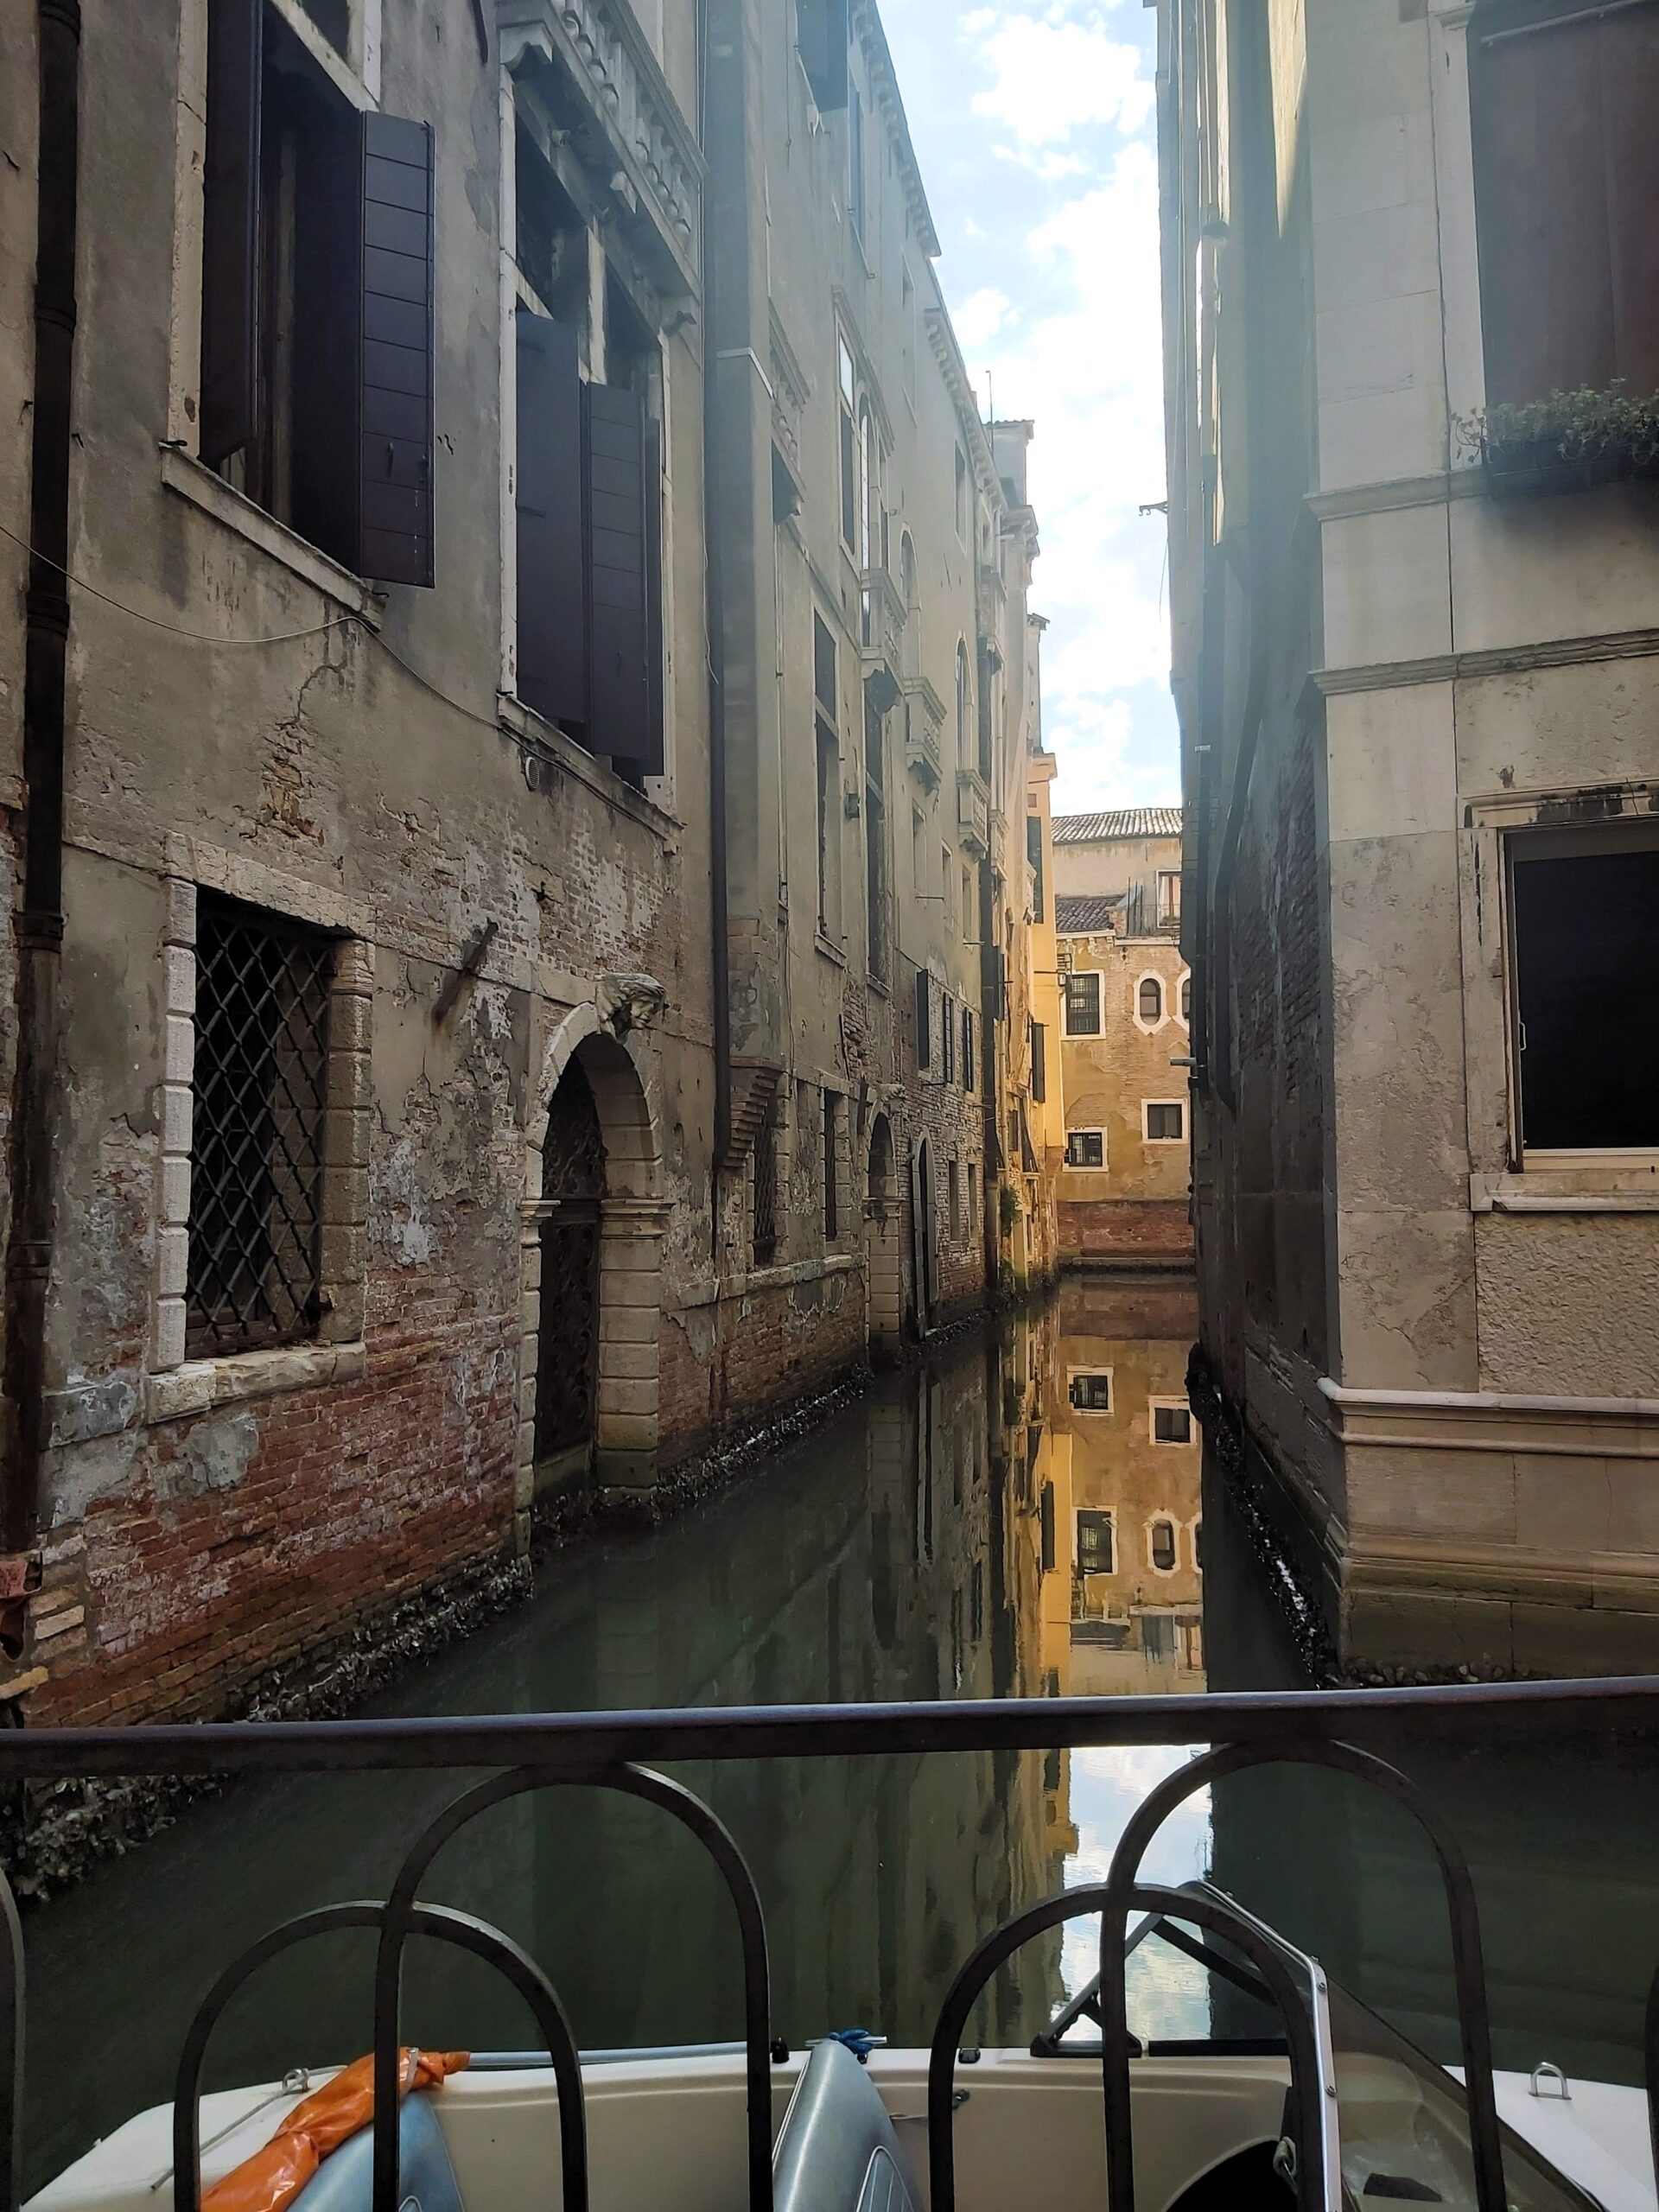 A still reflection of a building on a calm canal in Venice, Italy